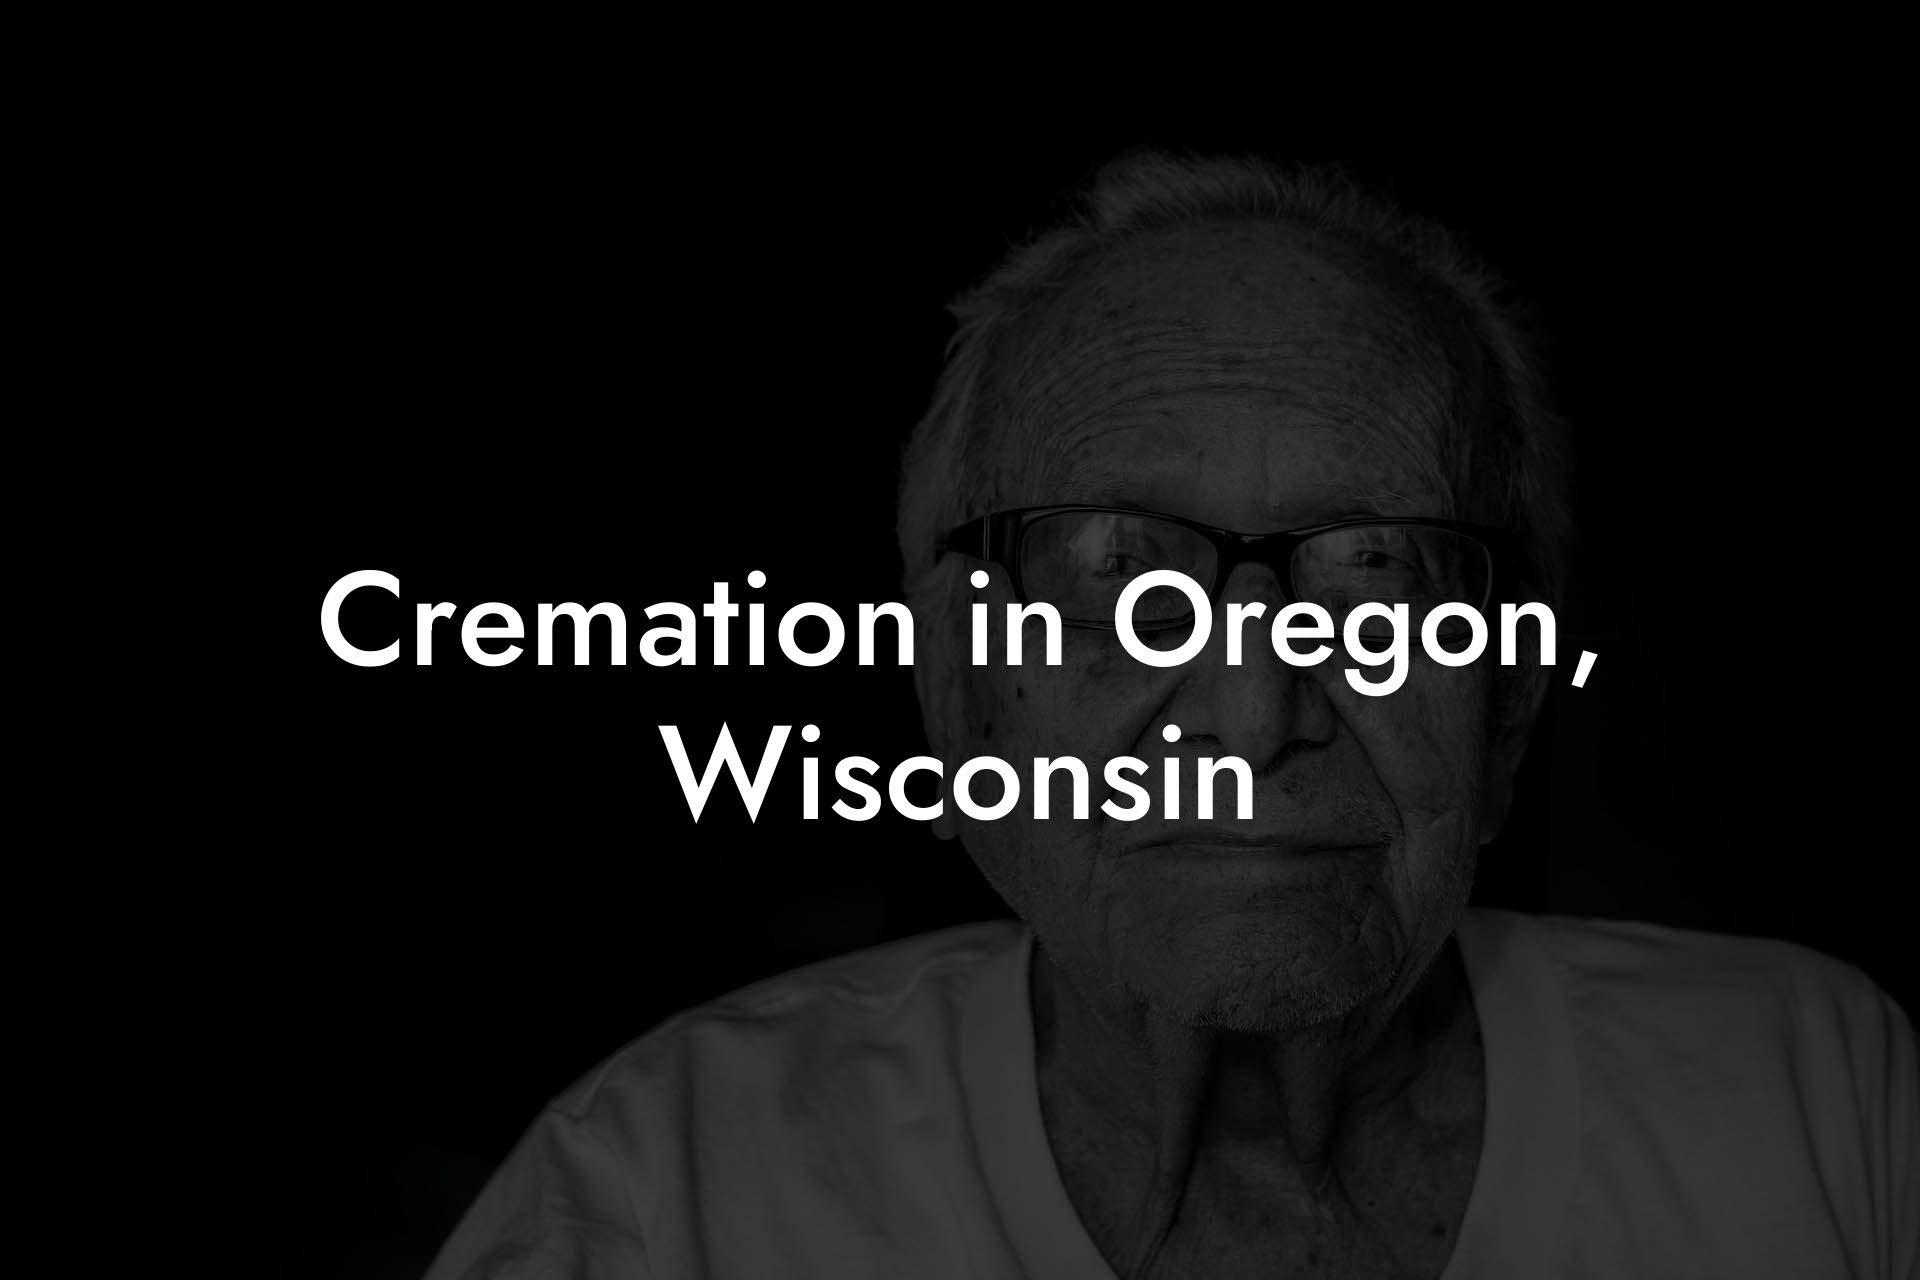 Cremation in Oregon, Wisconsin